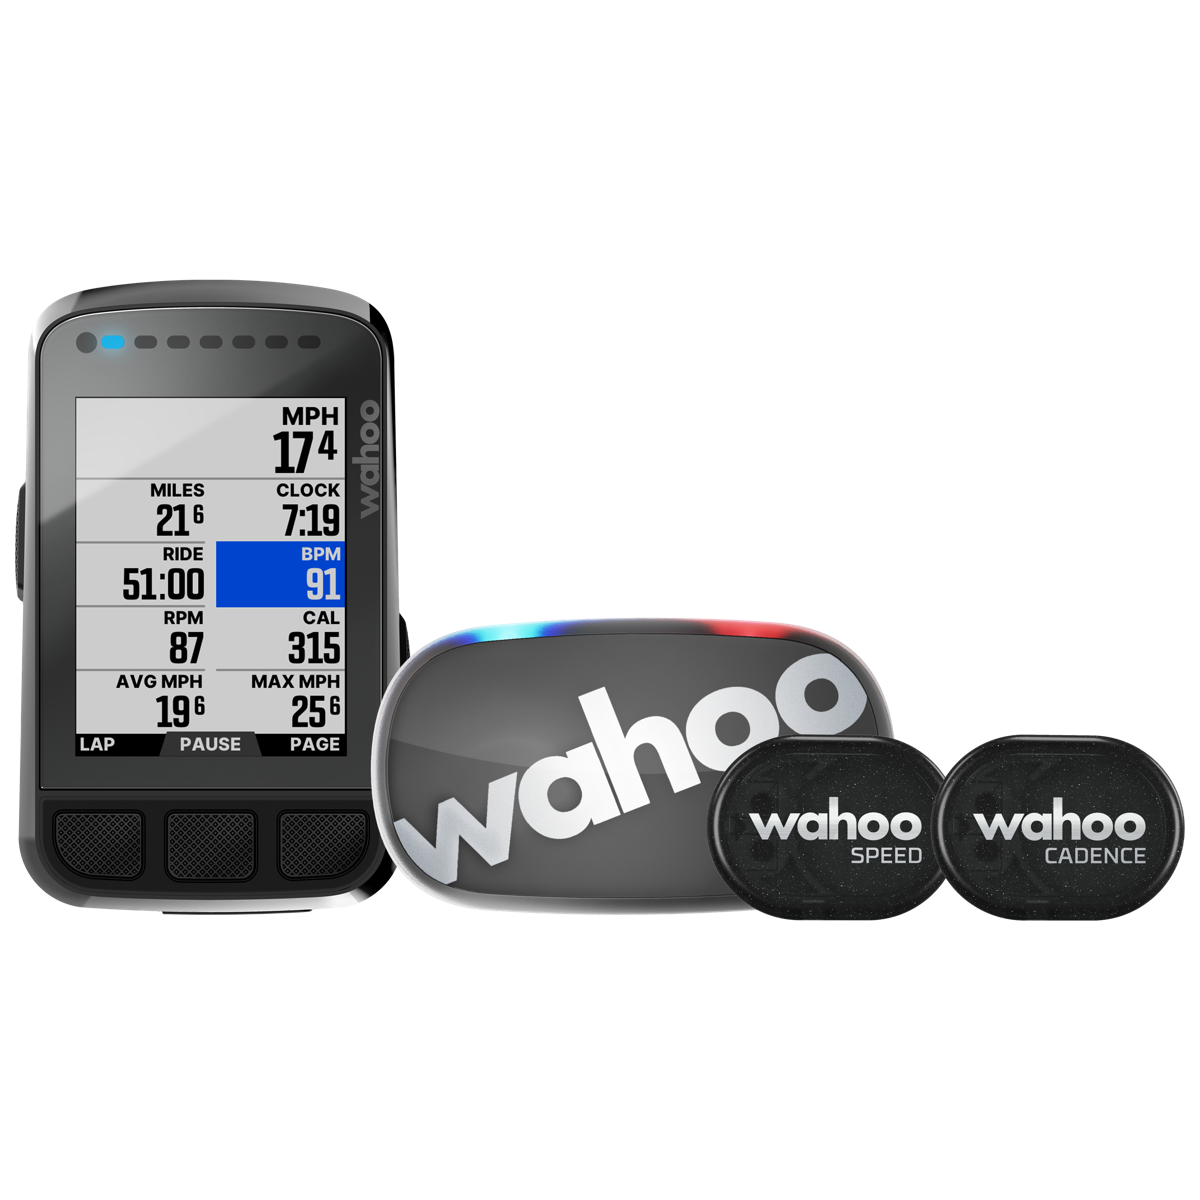 Wahoo ELEMNT Bolt V2 - Smaller Size, Feature Packed - Bike World News